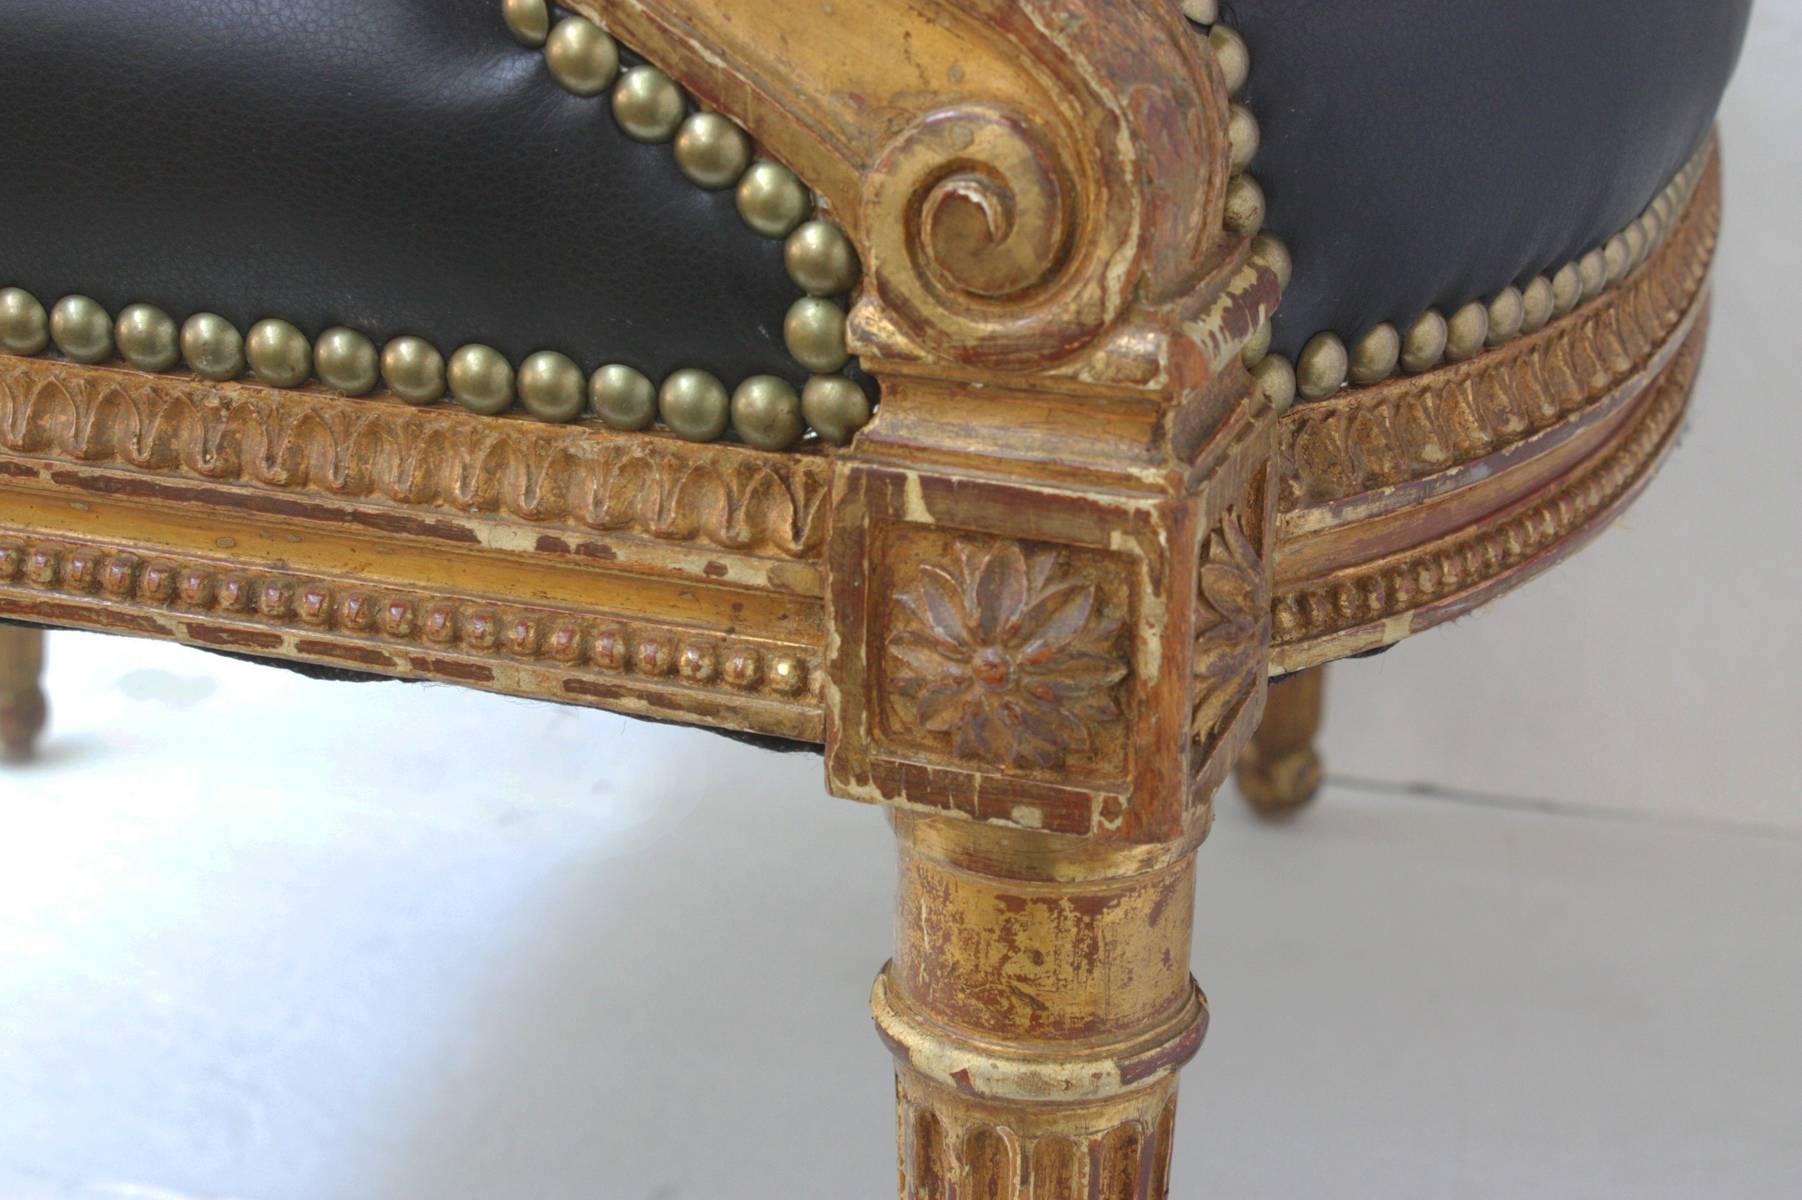 Hand-Carved Louis XVI Style Carved and Gilded Fauteuils, Two Pairs